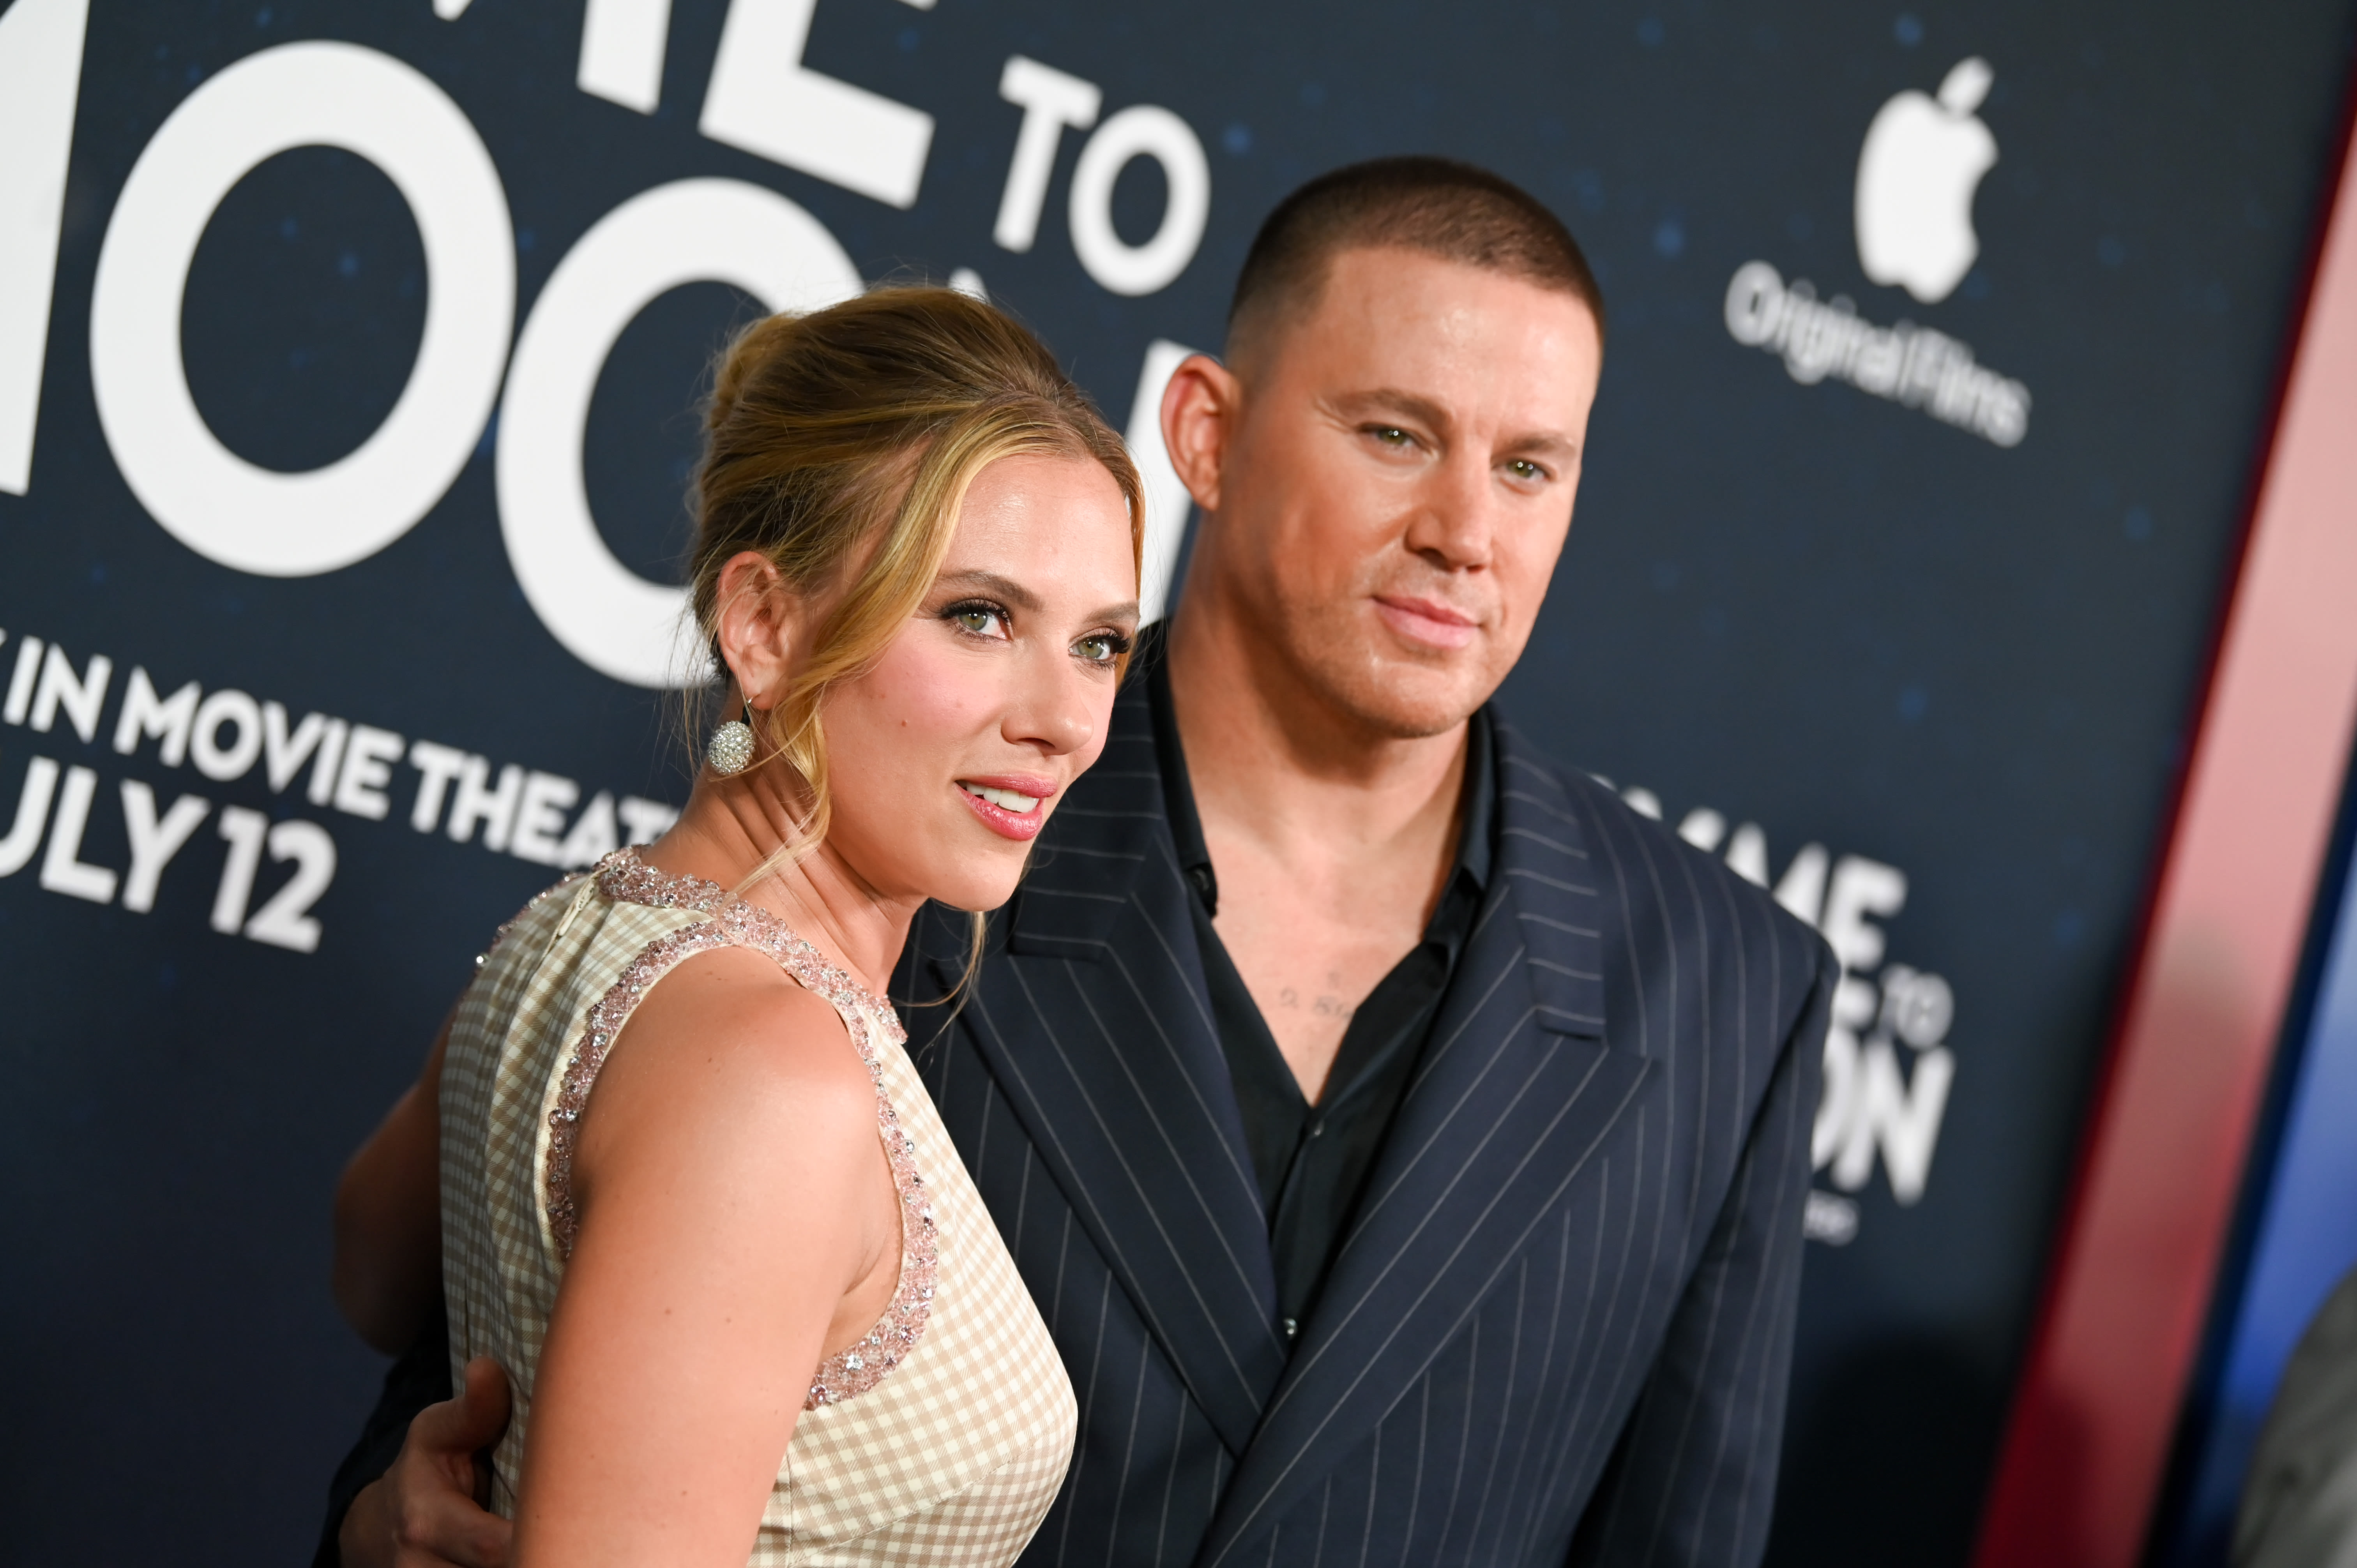 'Fly Me to the Moon': Unexpected 'secret sauce' to Scarlett Johansson, Channing Tatum movie